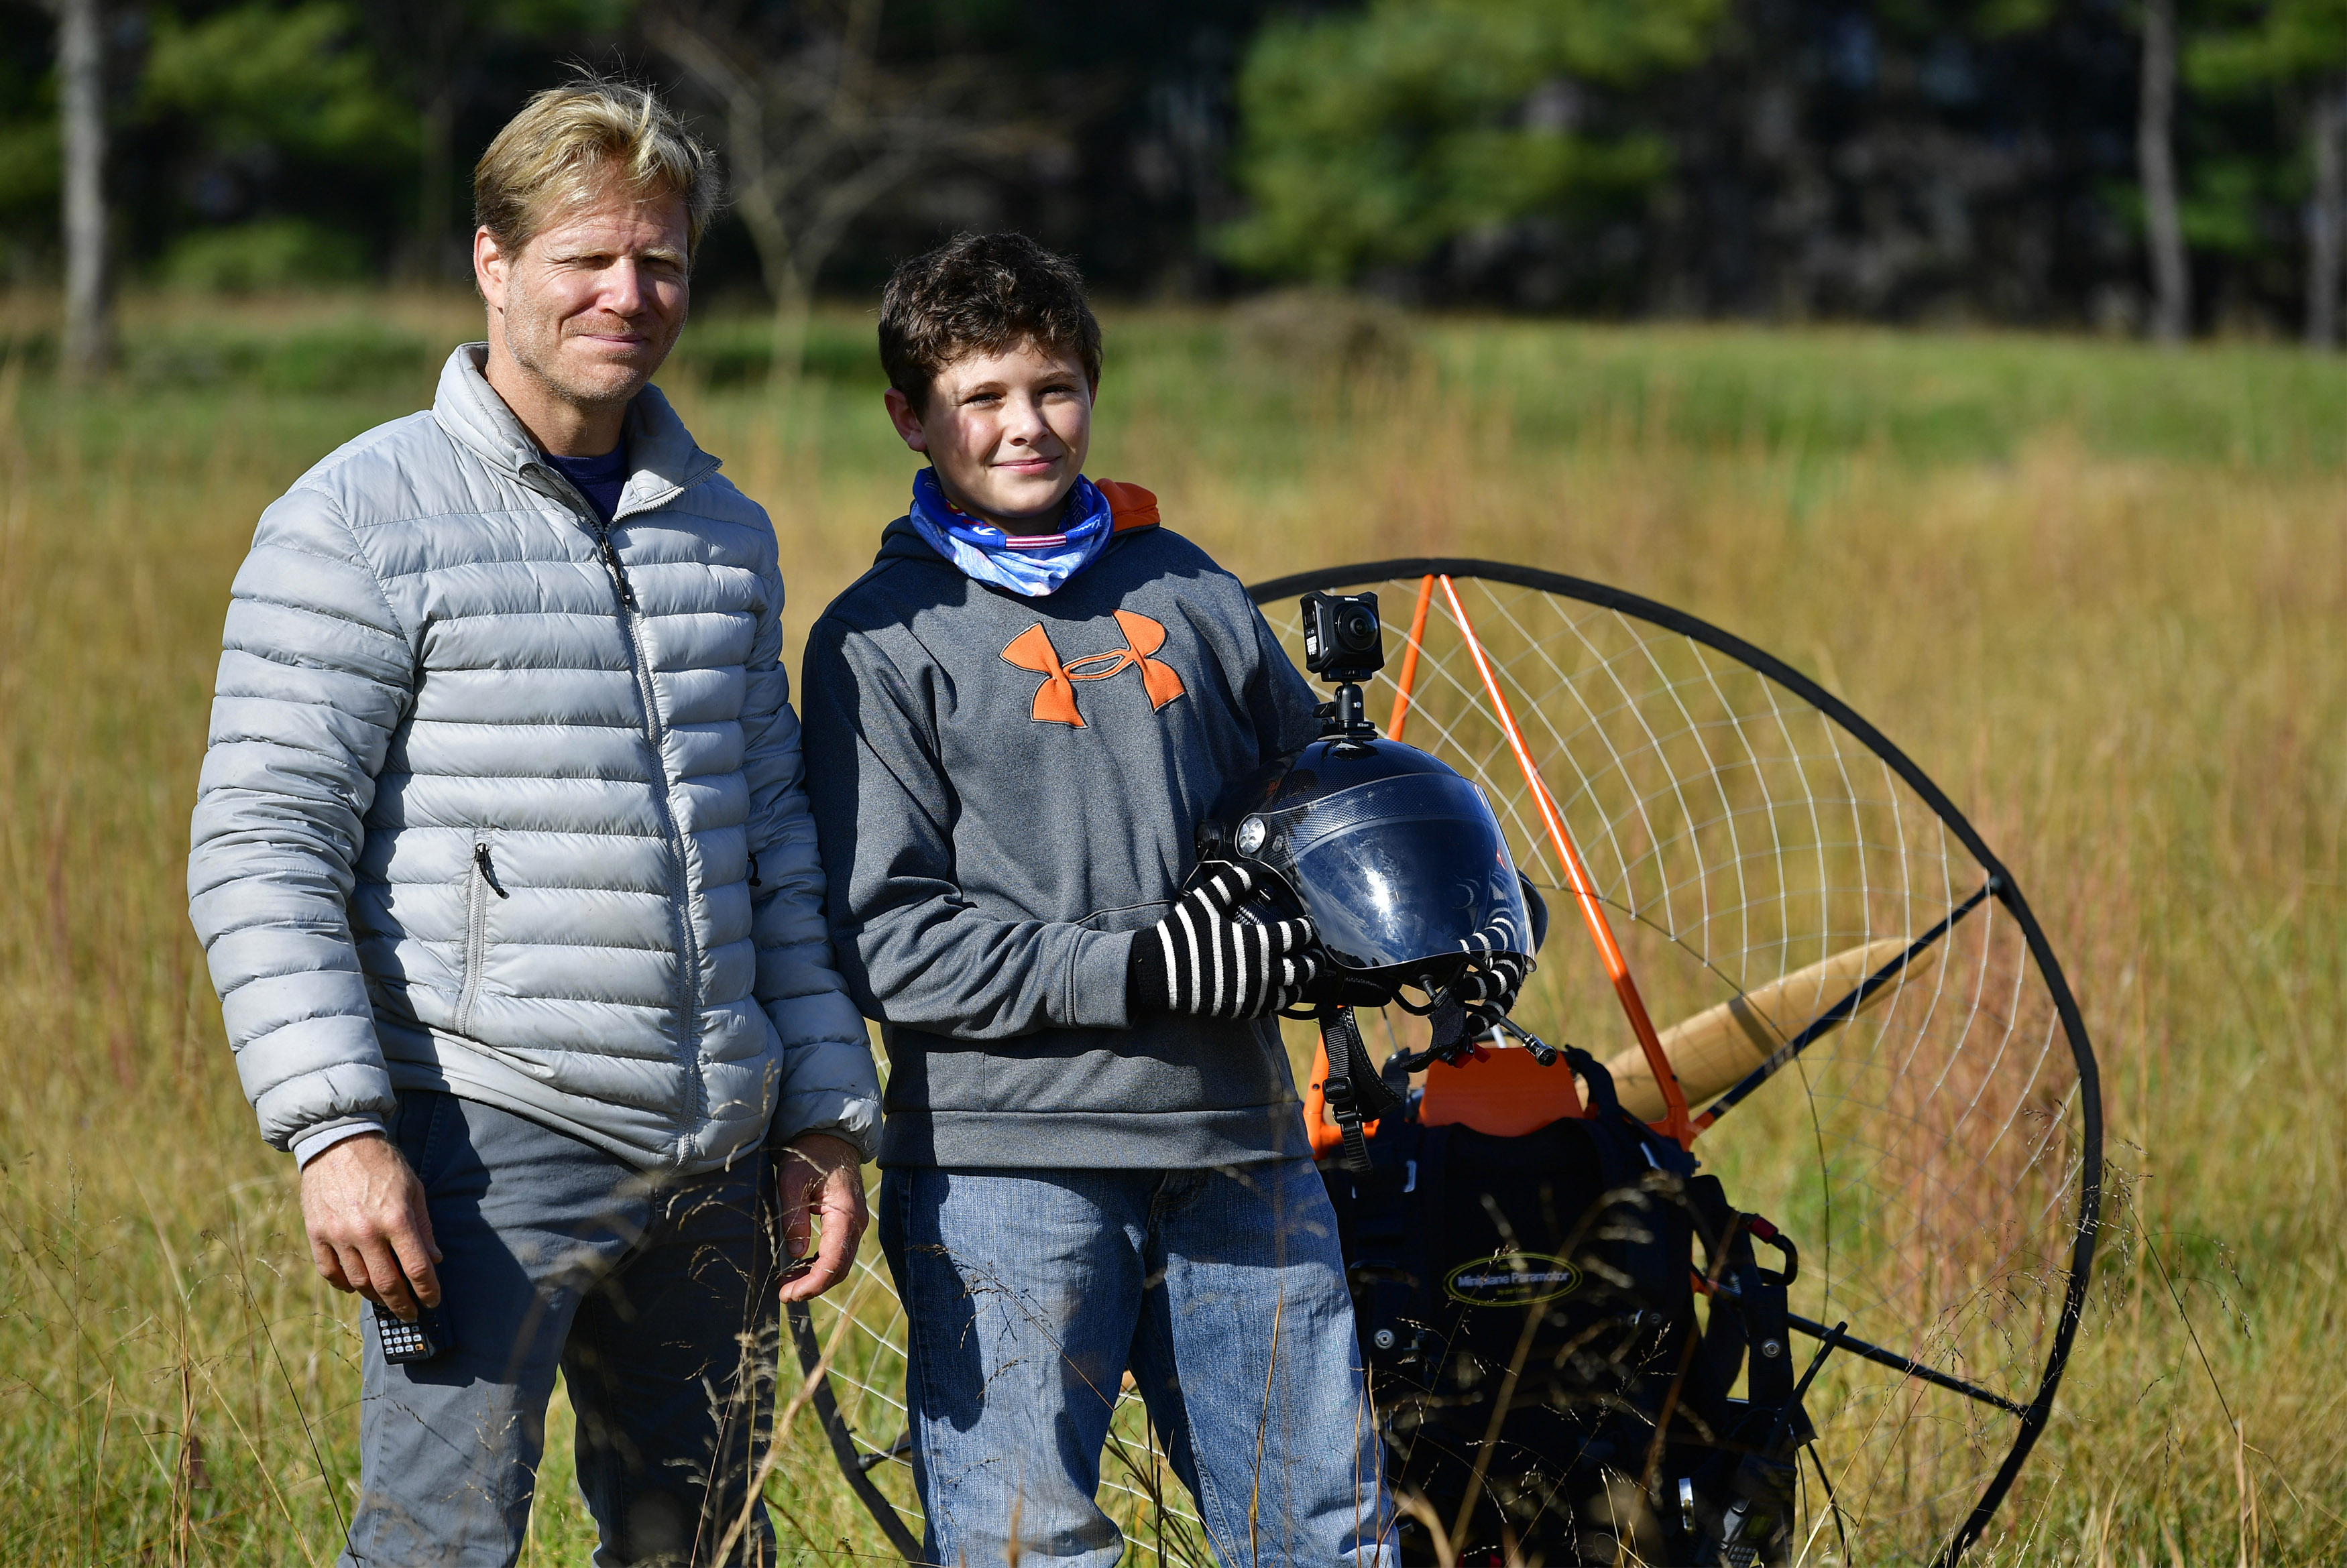 CFI and helicopter and fixed-wing pilot Jens Scott helped his teenage son Henry learn the basics of powered paragliding. Photo by David Tulis.